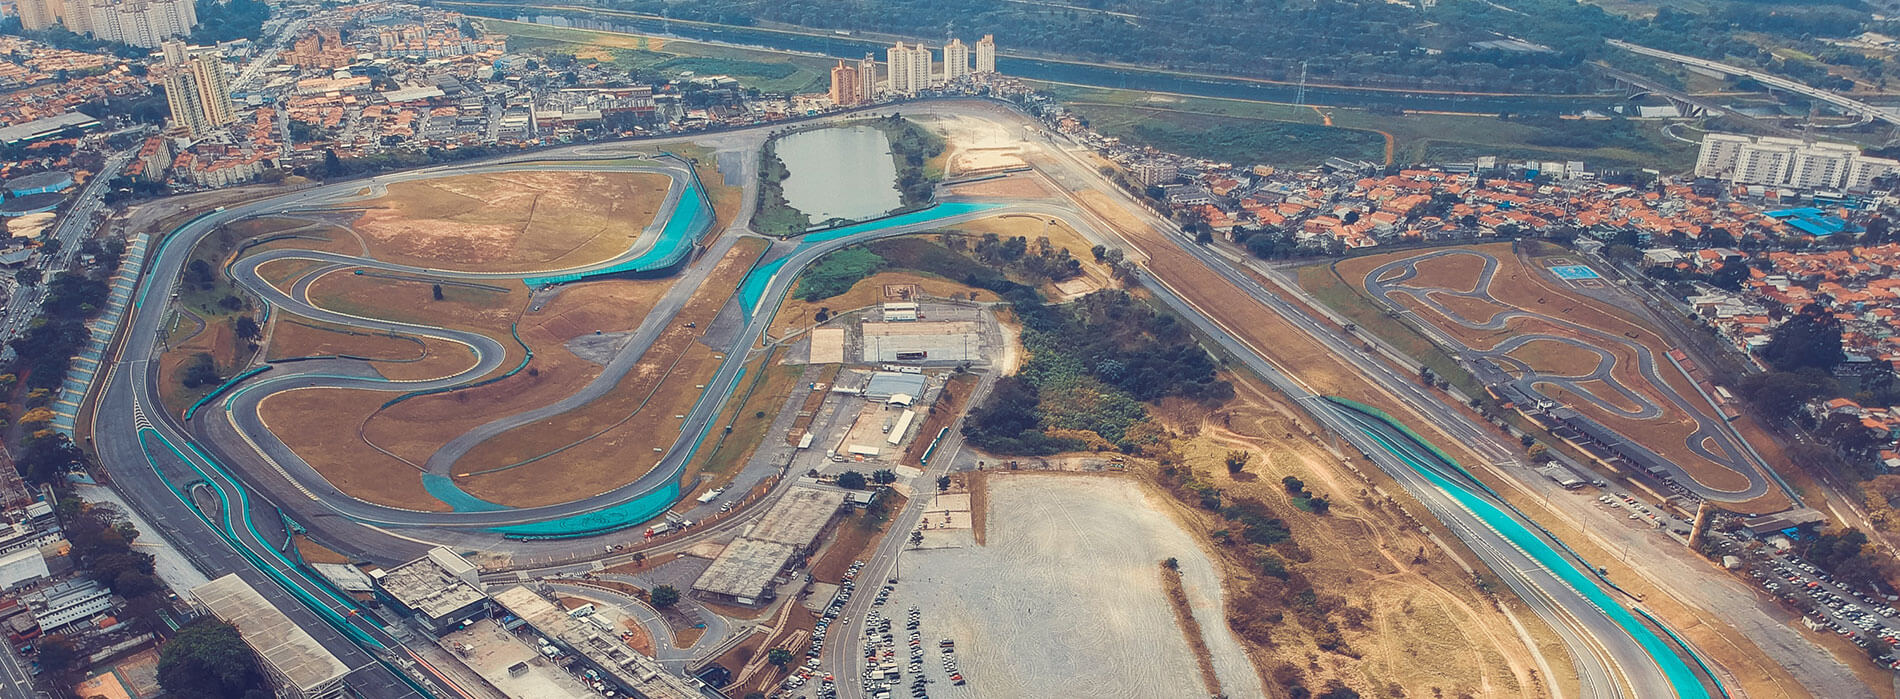 Brazilian Grand Prix Details: Circuit, Date, and Hospitality